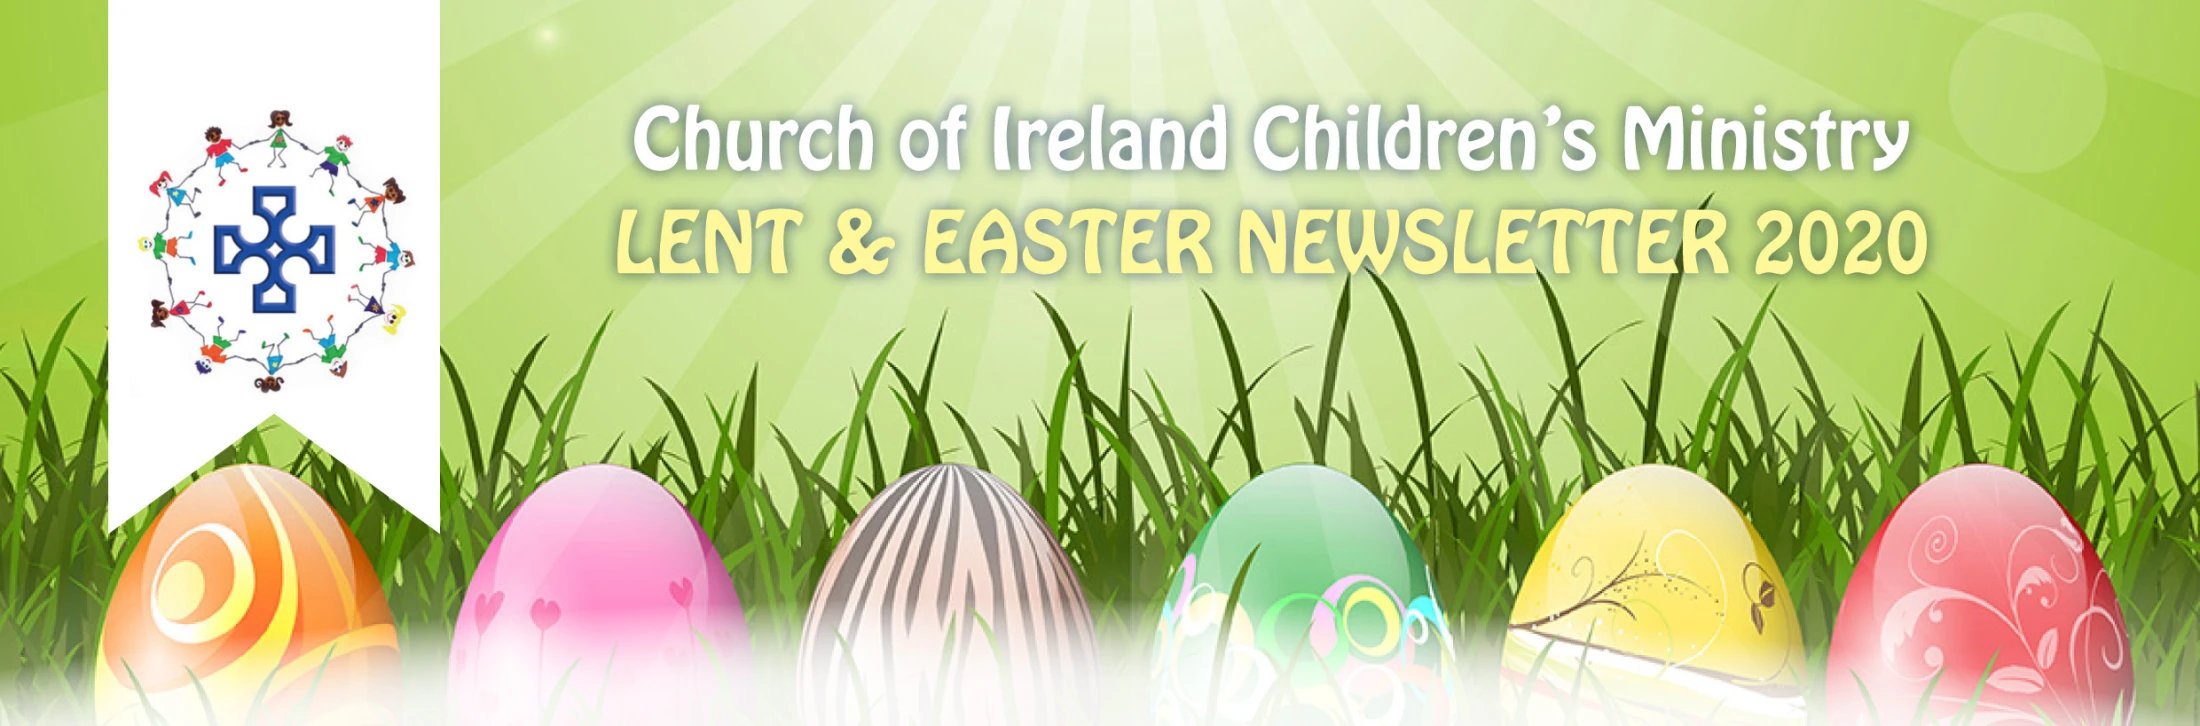 Children’s Ministry Ideas for Lent and Easter